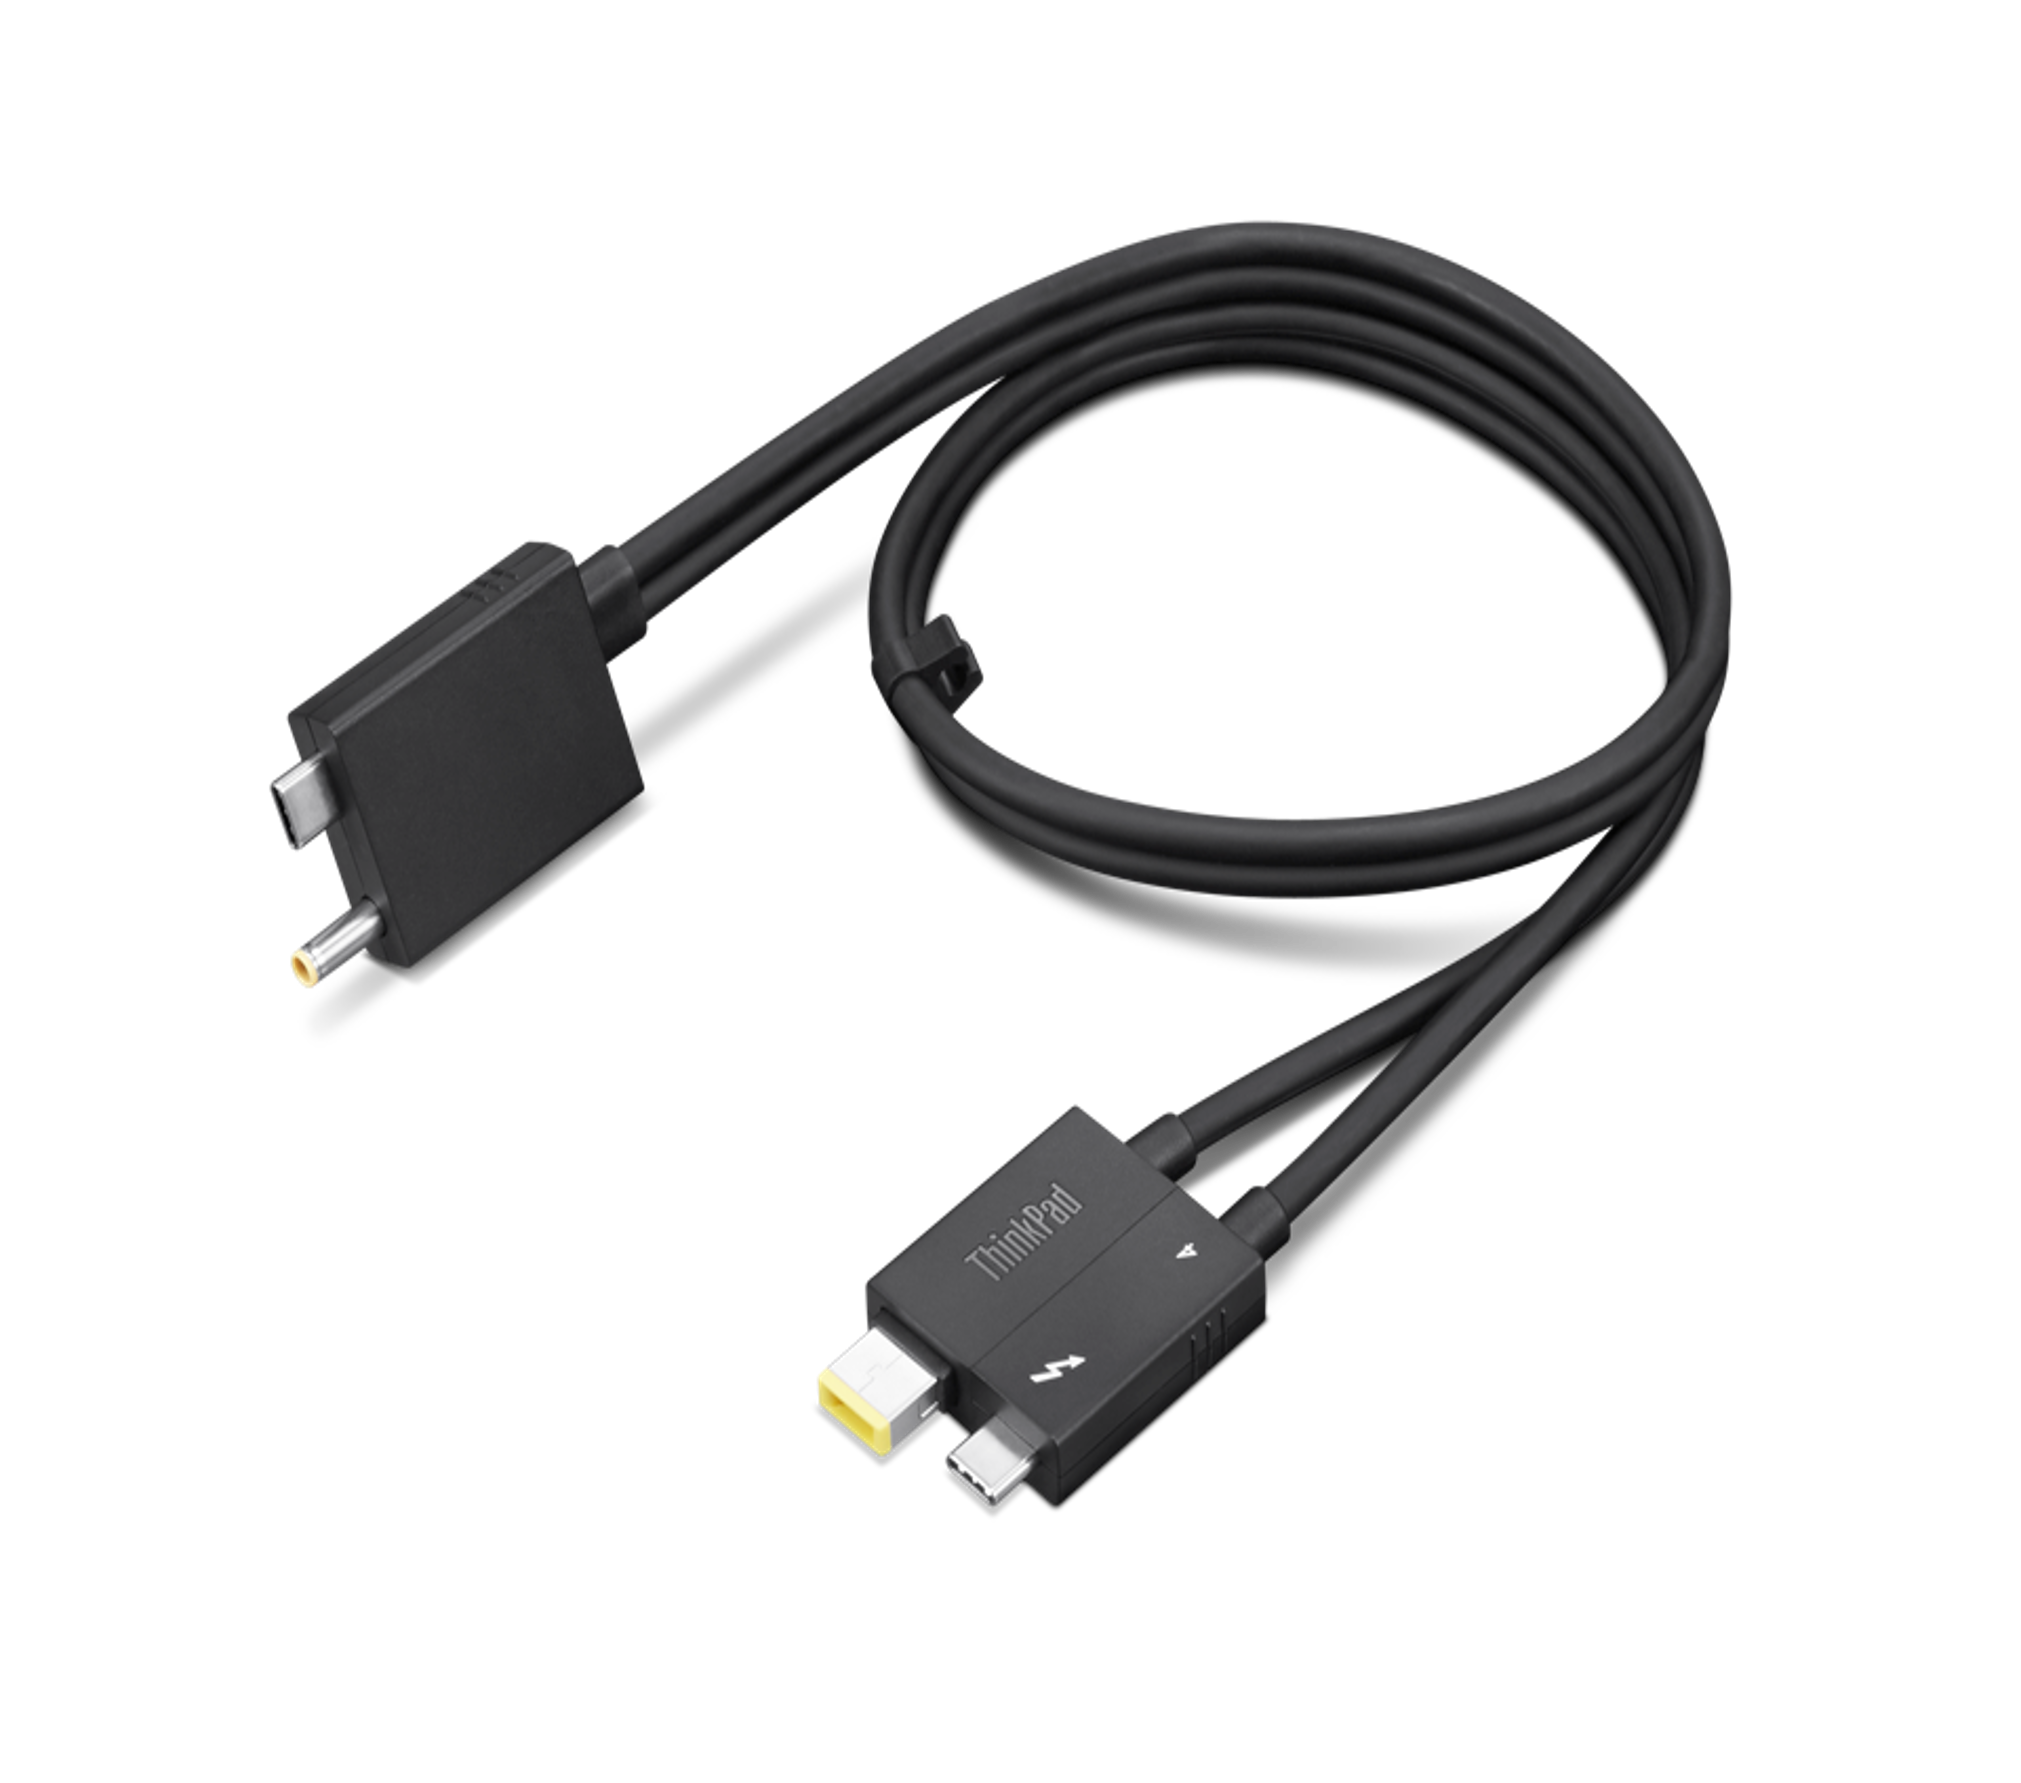 ThinkPad Thunderbolt 4 WorkStation Dock Split Cable 0.7m - Overview and  Service Parts - Lenovo Support SV